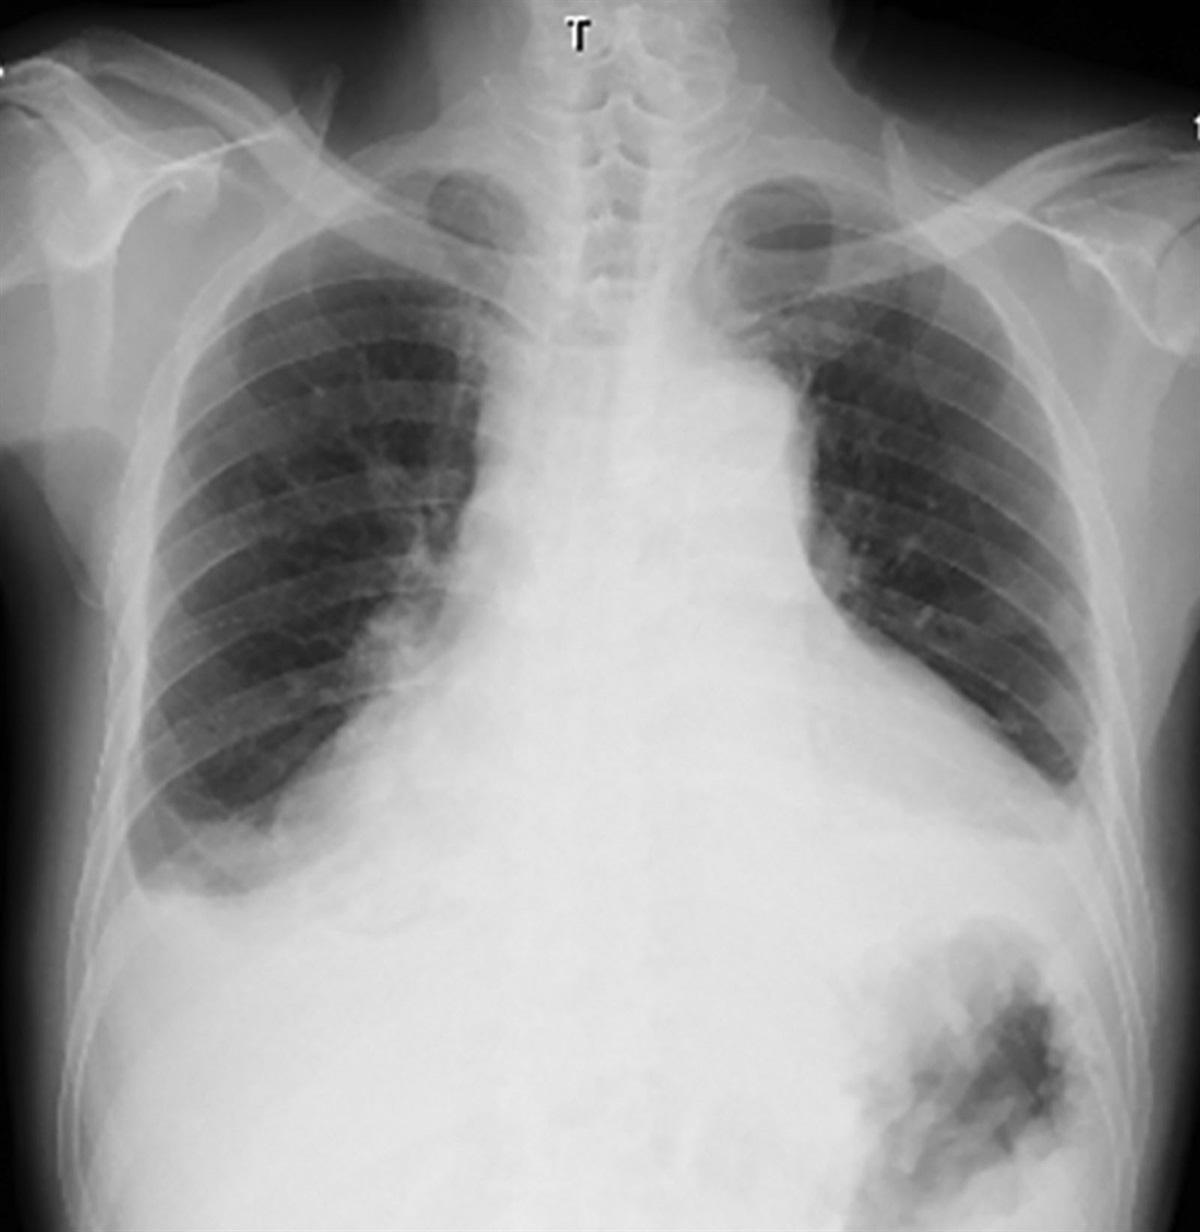 Successful treatment with lenvatinib in a patient with thymic carcinoma presenting with cardiac tamponade: a case report and review of literature